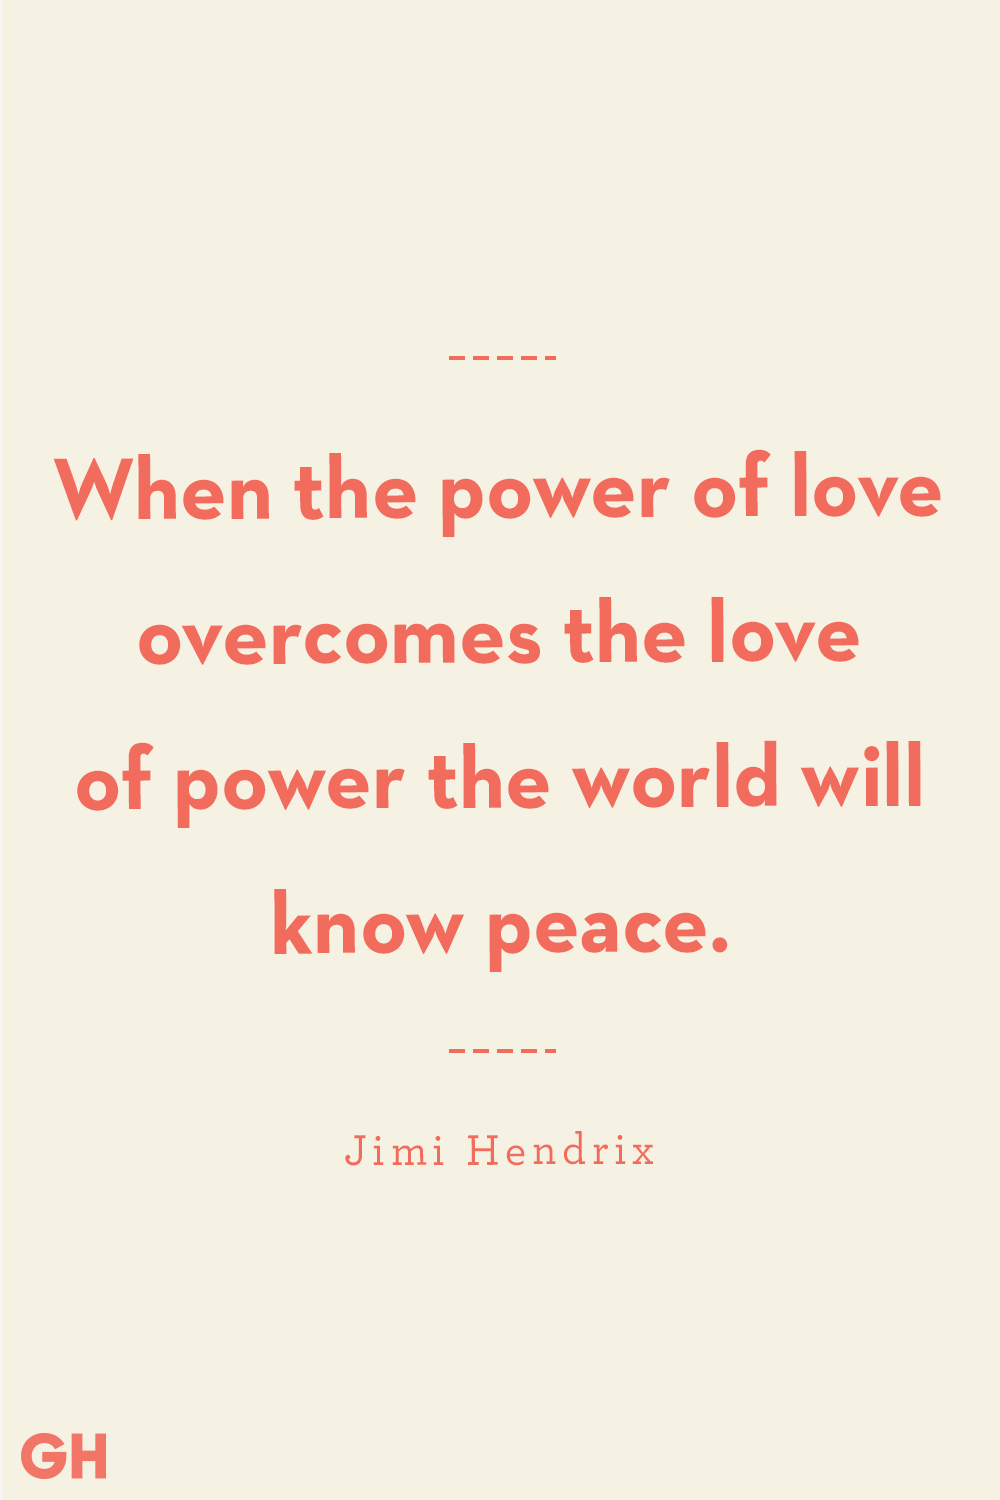 30 Best Peace Quotes - Quotes and Sayings About Peace and Tranquility